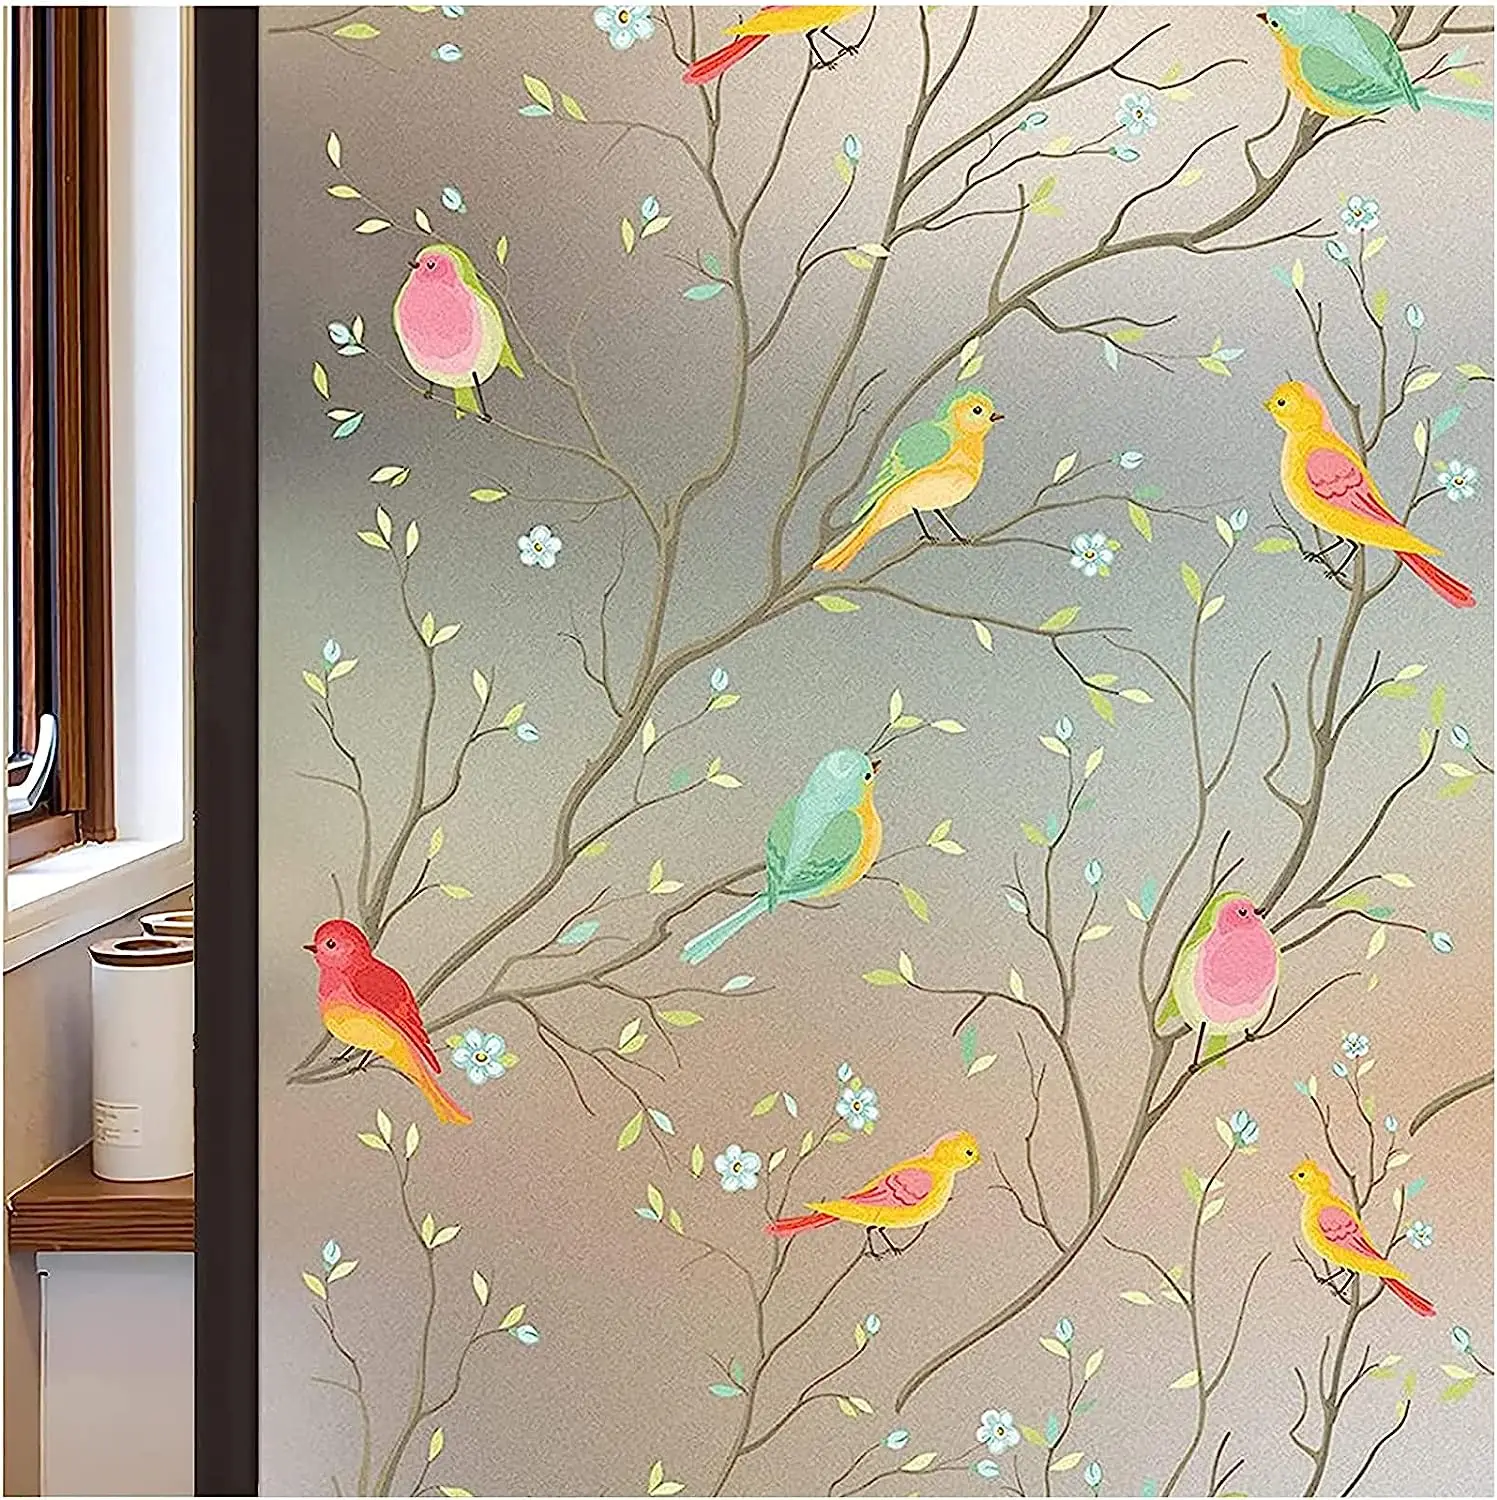 

YUNMIM Anti Look Window Privacy Film Stained Glass Film Non-Adhesive Static Cling Decorative Frosted Heat Blocker Vinyl